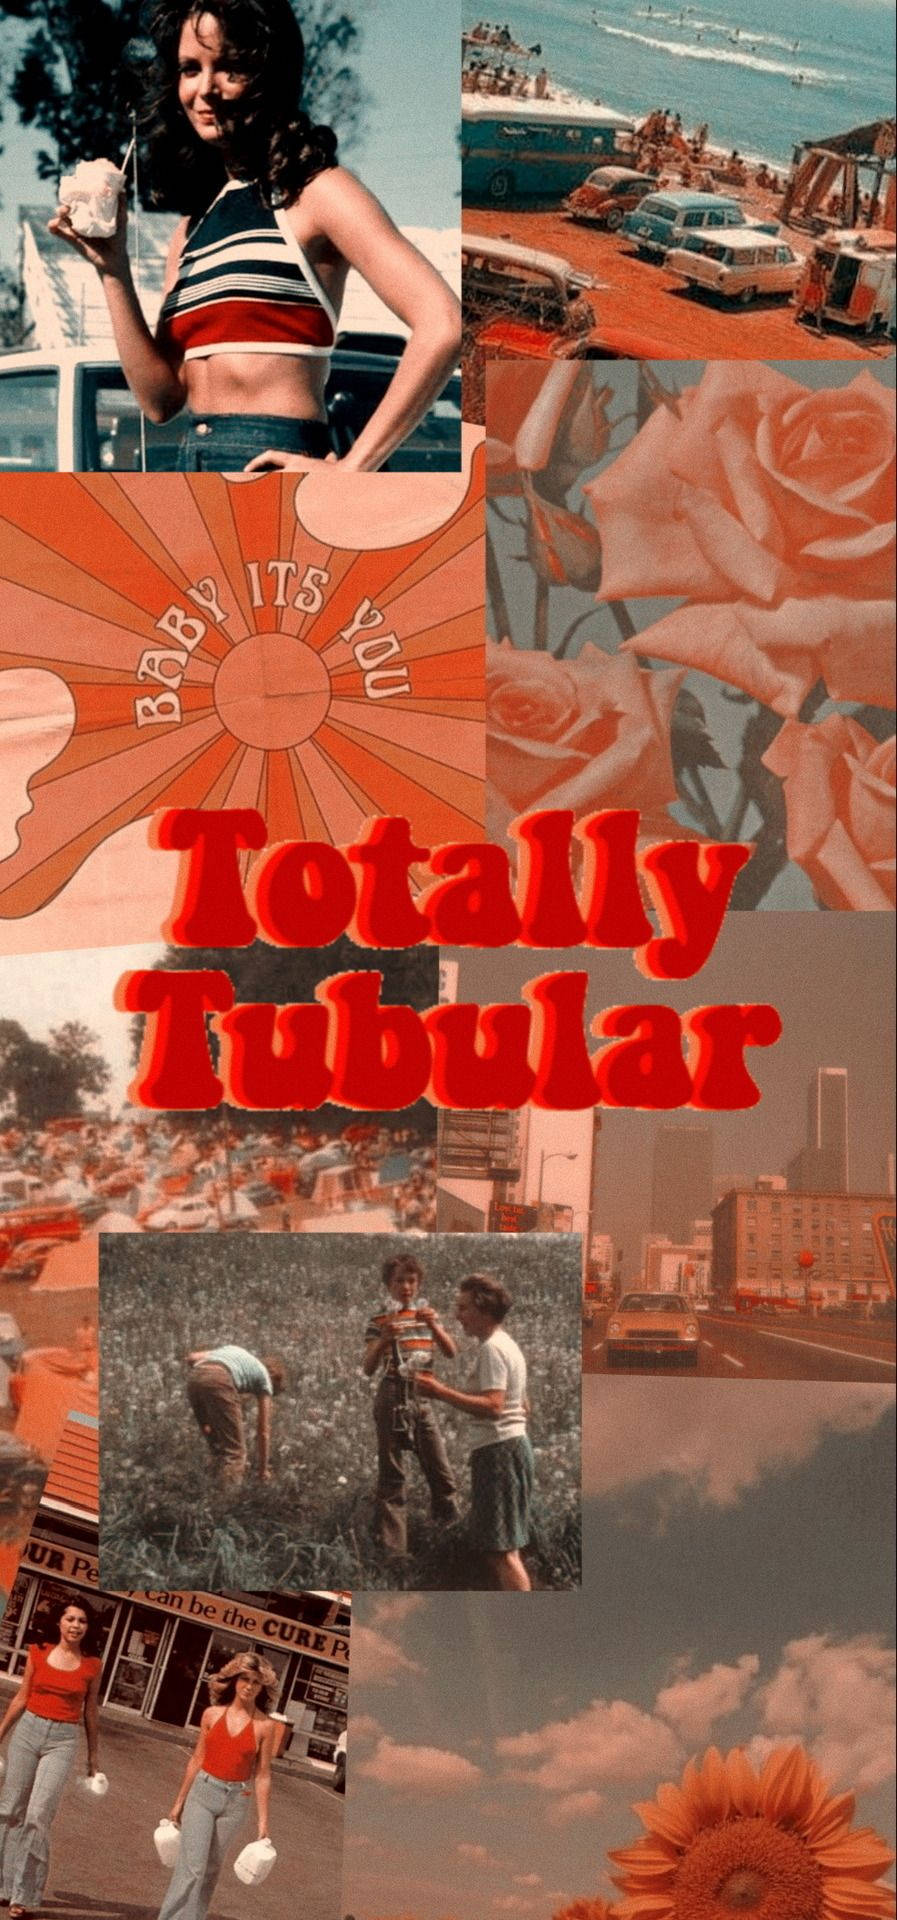 A collage of vintage images in red and orange hues with the words 